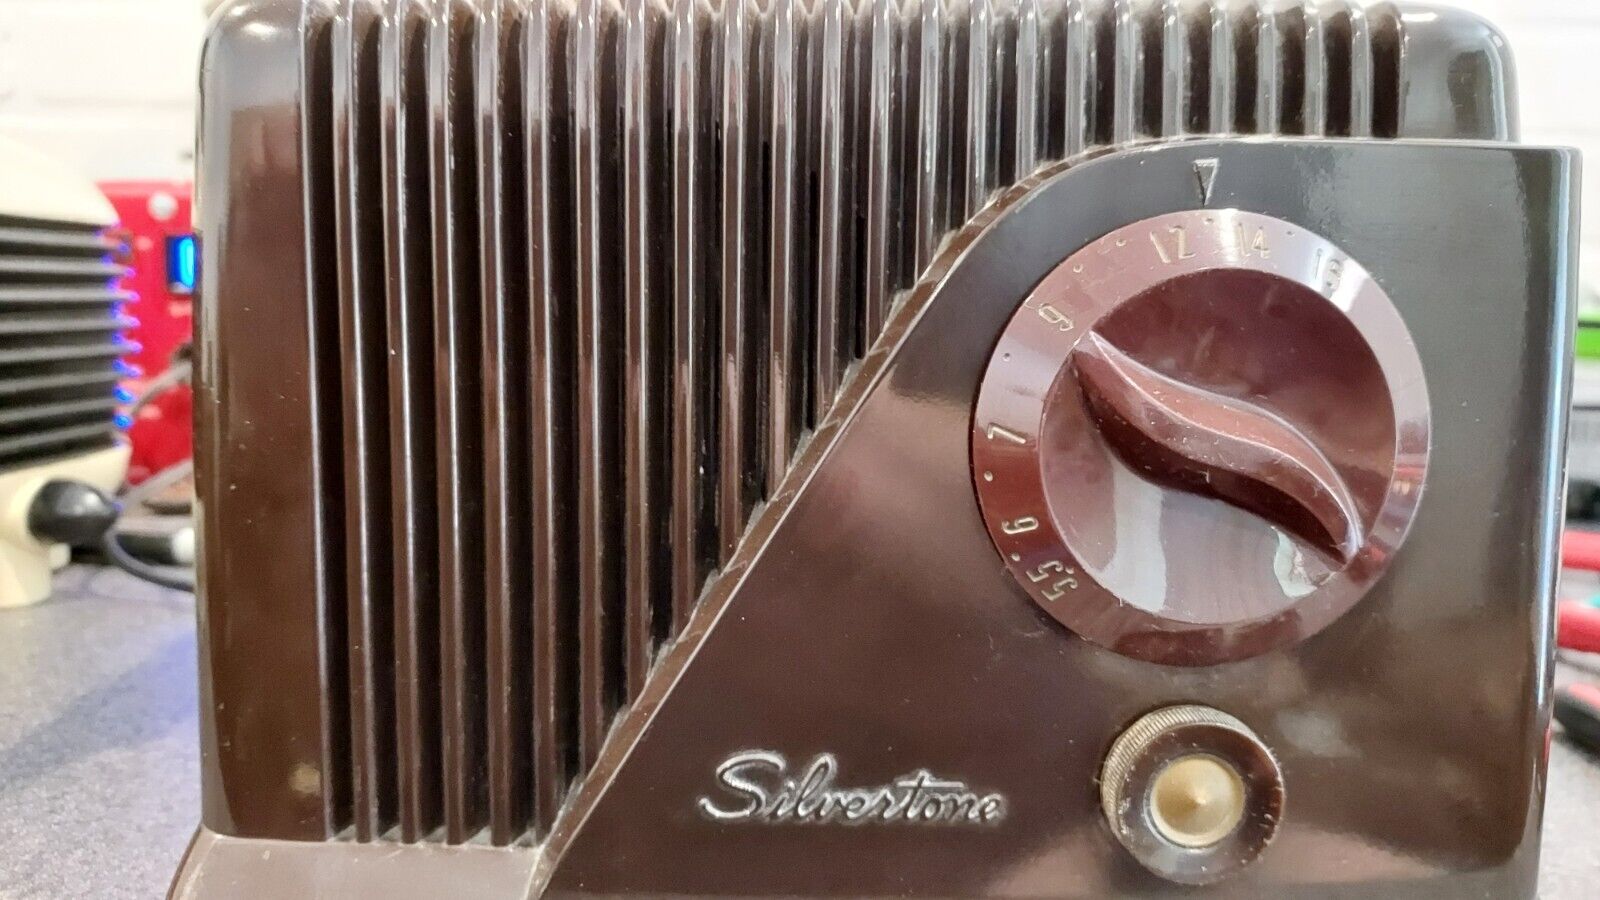 The Silvertone Model 9000 is a wonderful example of 1940's streamlined design